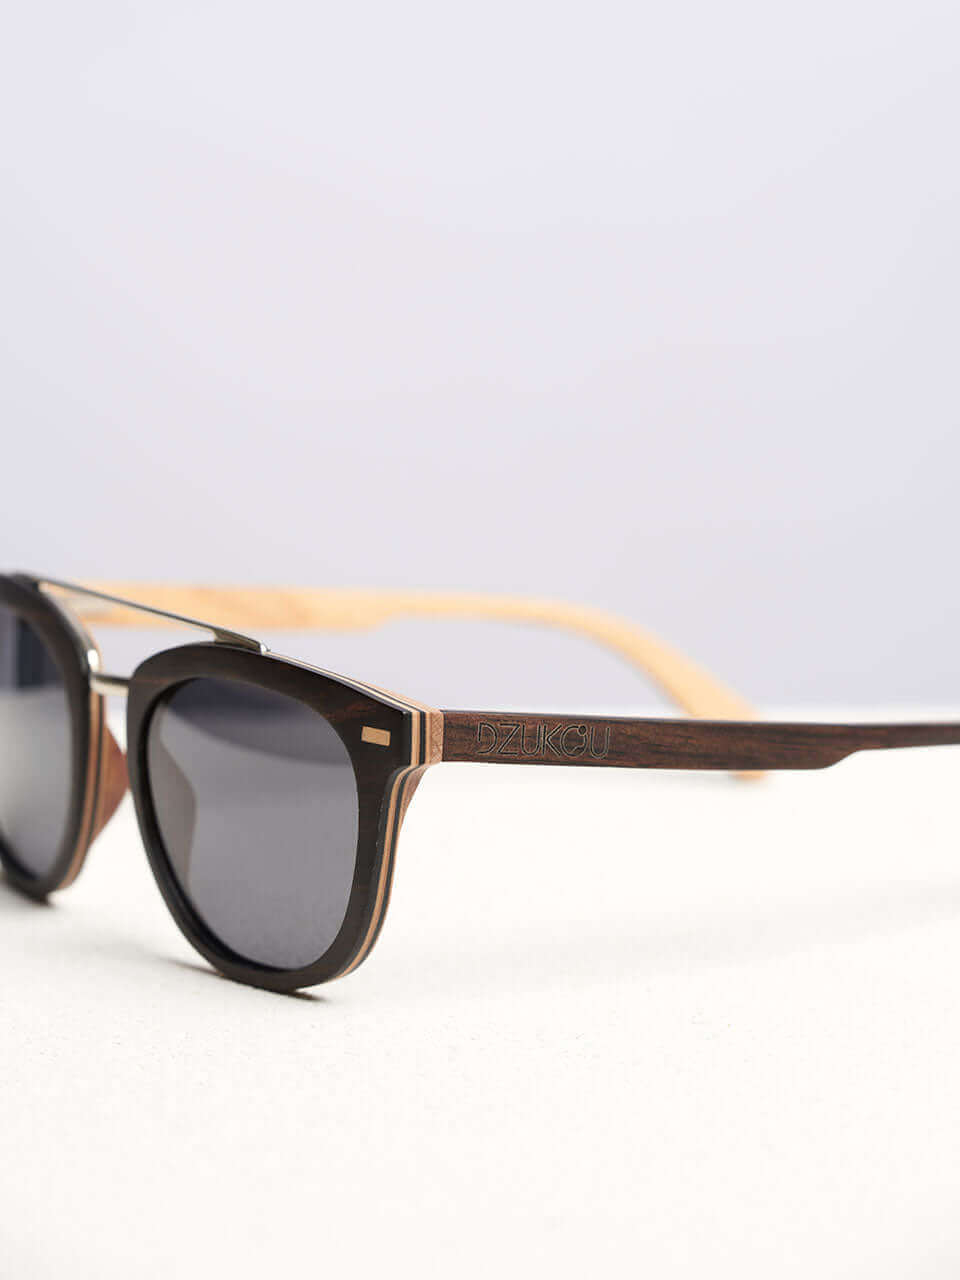 side view of a wooden sunglasses